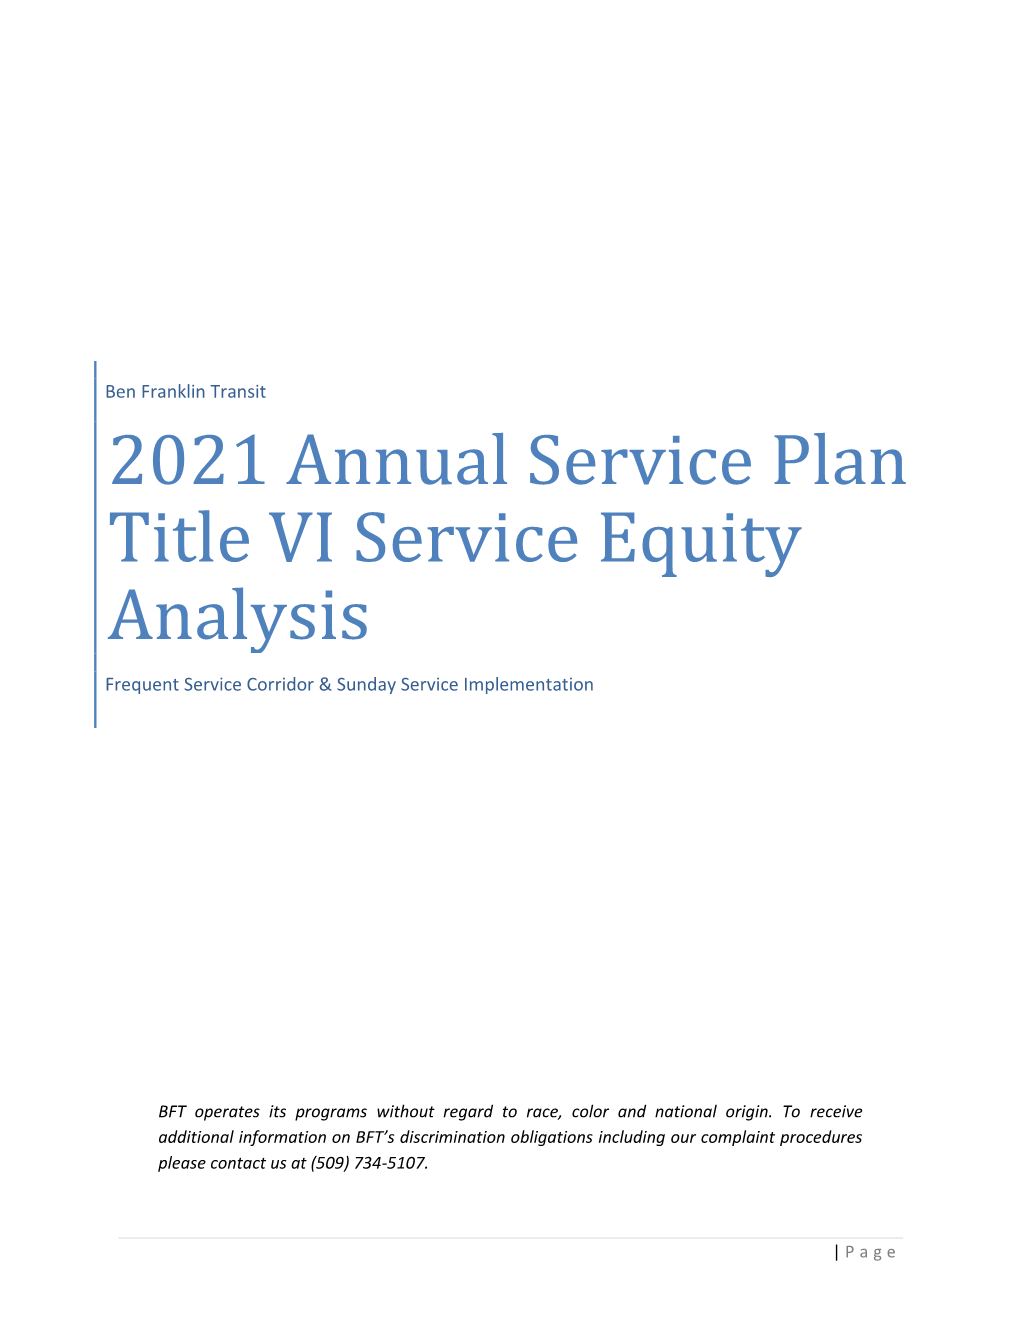 2021 Annual Service Plan Title VI Service Equity Analysis